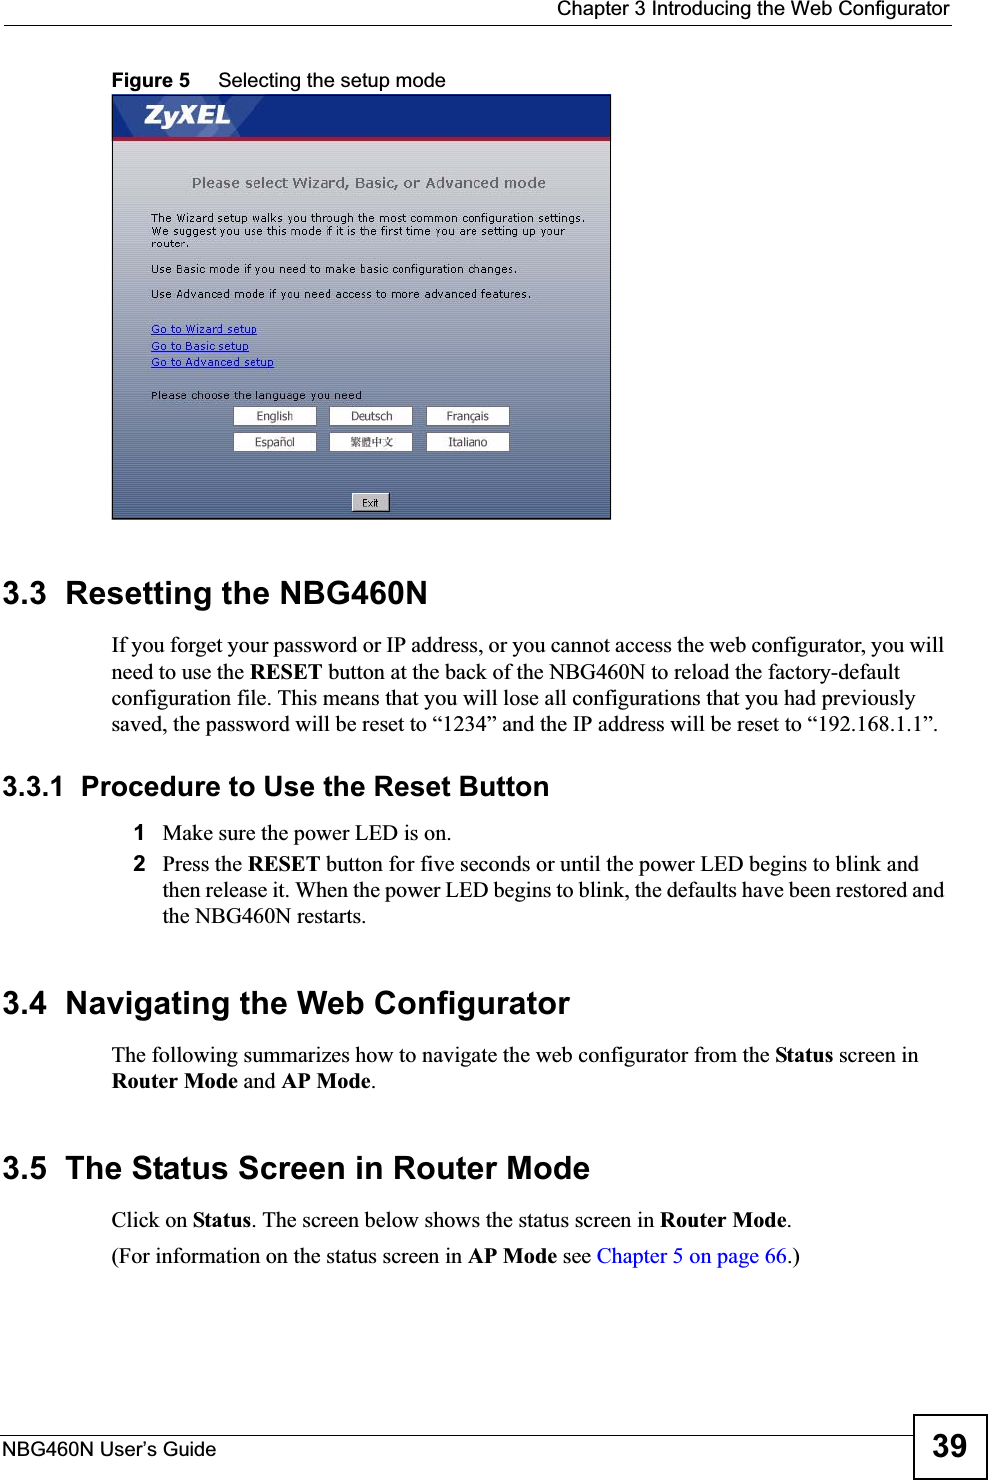  Chapter 3 Introducing the Web ConfiguratorNBG460N User’s Guide 39Figure 5     Selecting the setup mode3.3  Resetting the NBG460NIf you forget your password or IP address, or you cannot access the web configurator, you will need to use the RESET button at the back of the NBG460N to reload the factory-default configuration file. This means that you will lose all configurations that you had previously saved, the password will be reset to “1234” and the IP address will be reset to “192.168.1.1”.3.3.1  Procedure to Use the Reset Button1Make sure the power LED is on.2Press the RESET button for five seconds or until the power LED begins to blink and then release it. When the power LED begins to blink, the defaults have been restored and the NBG460N restarts.3.4  Navigating the Web Configurator    The following summarizes how to navigate the web configurator from the Status screen in Router Mode and AP Mode.3.5  The Status Screen in Router ModeClick on Status. The screen below shows the status screen in Router Mode.(For information on the status screen in AP Mode see Chapter 5 on page 66.)